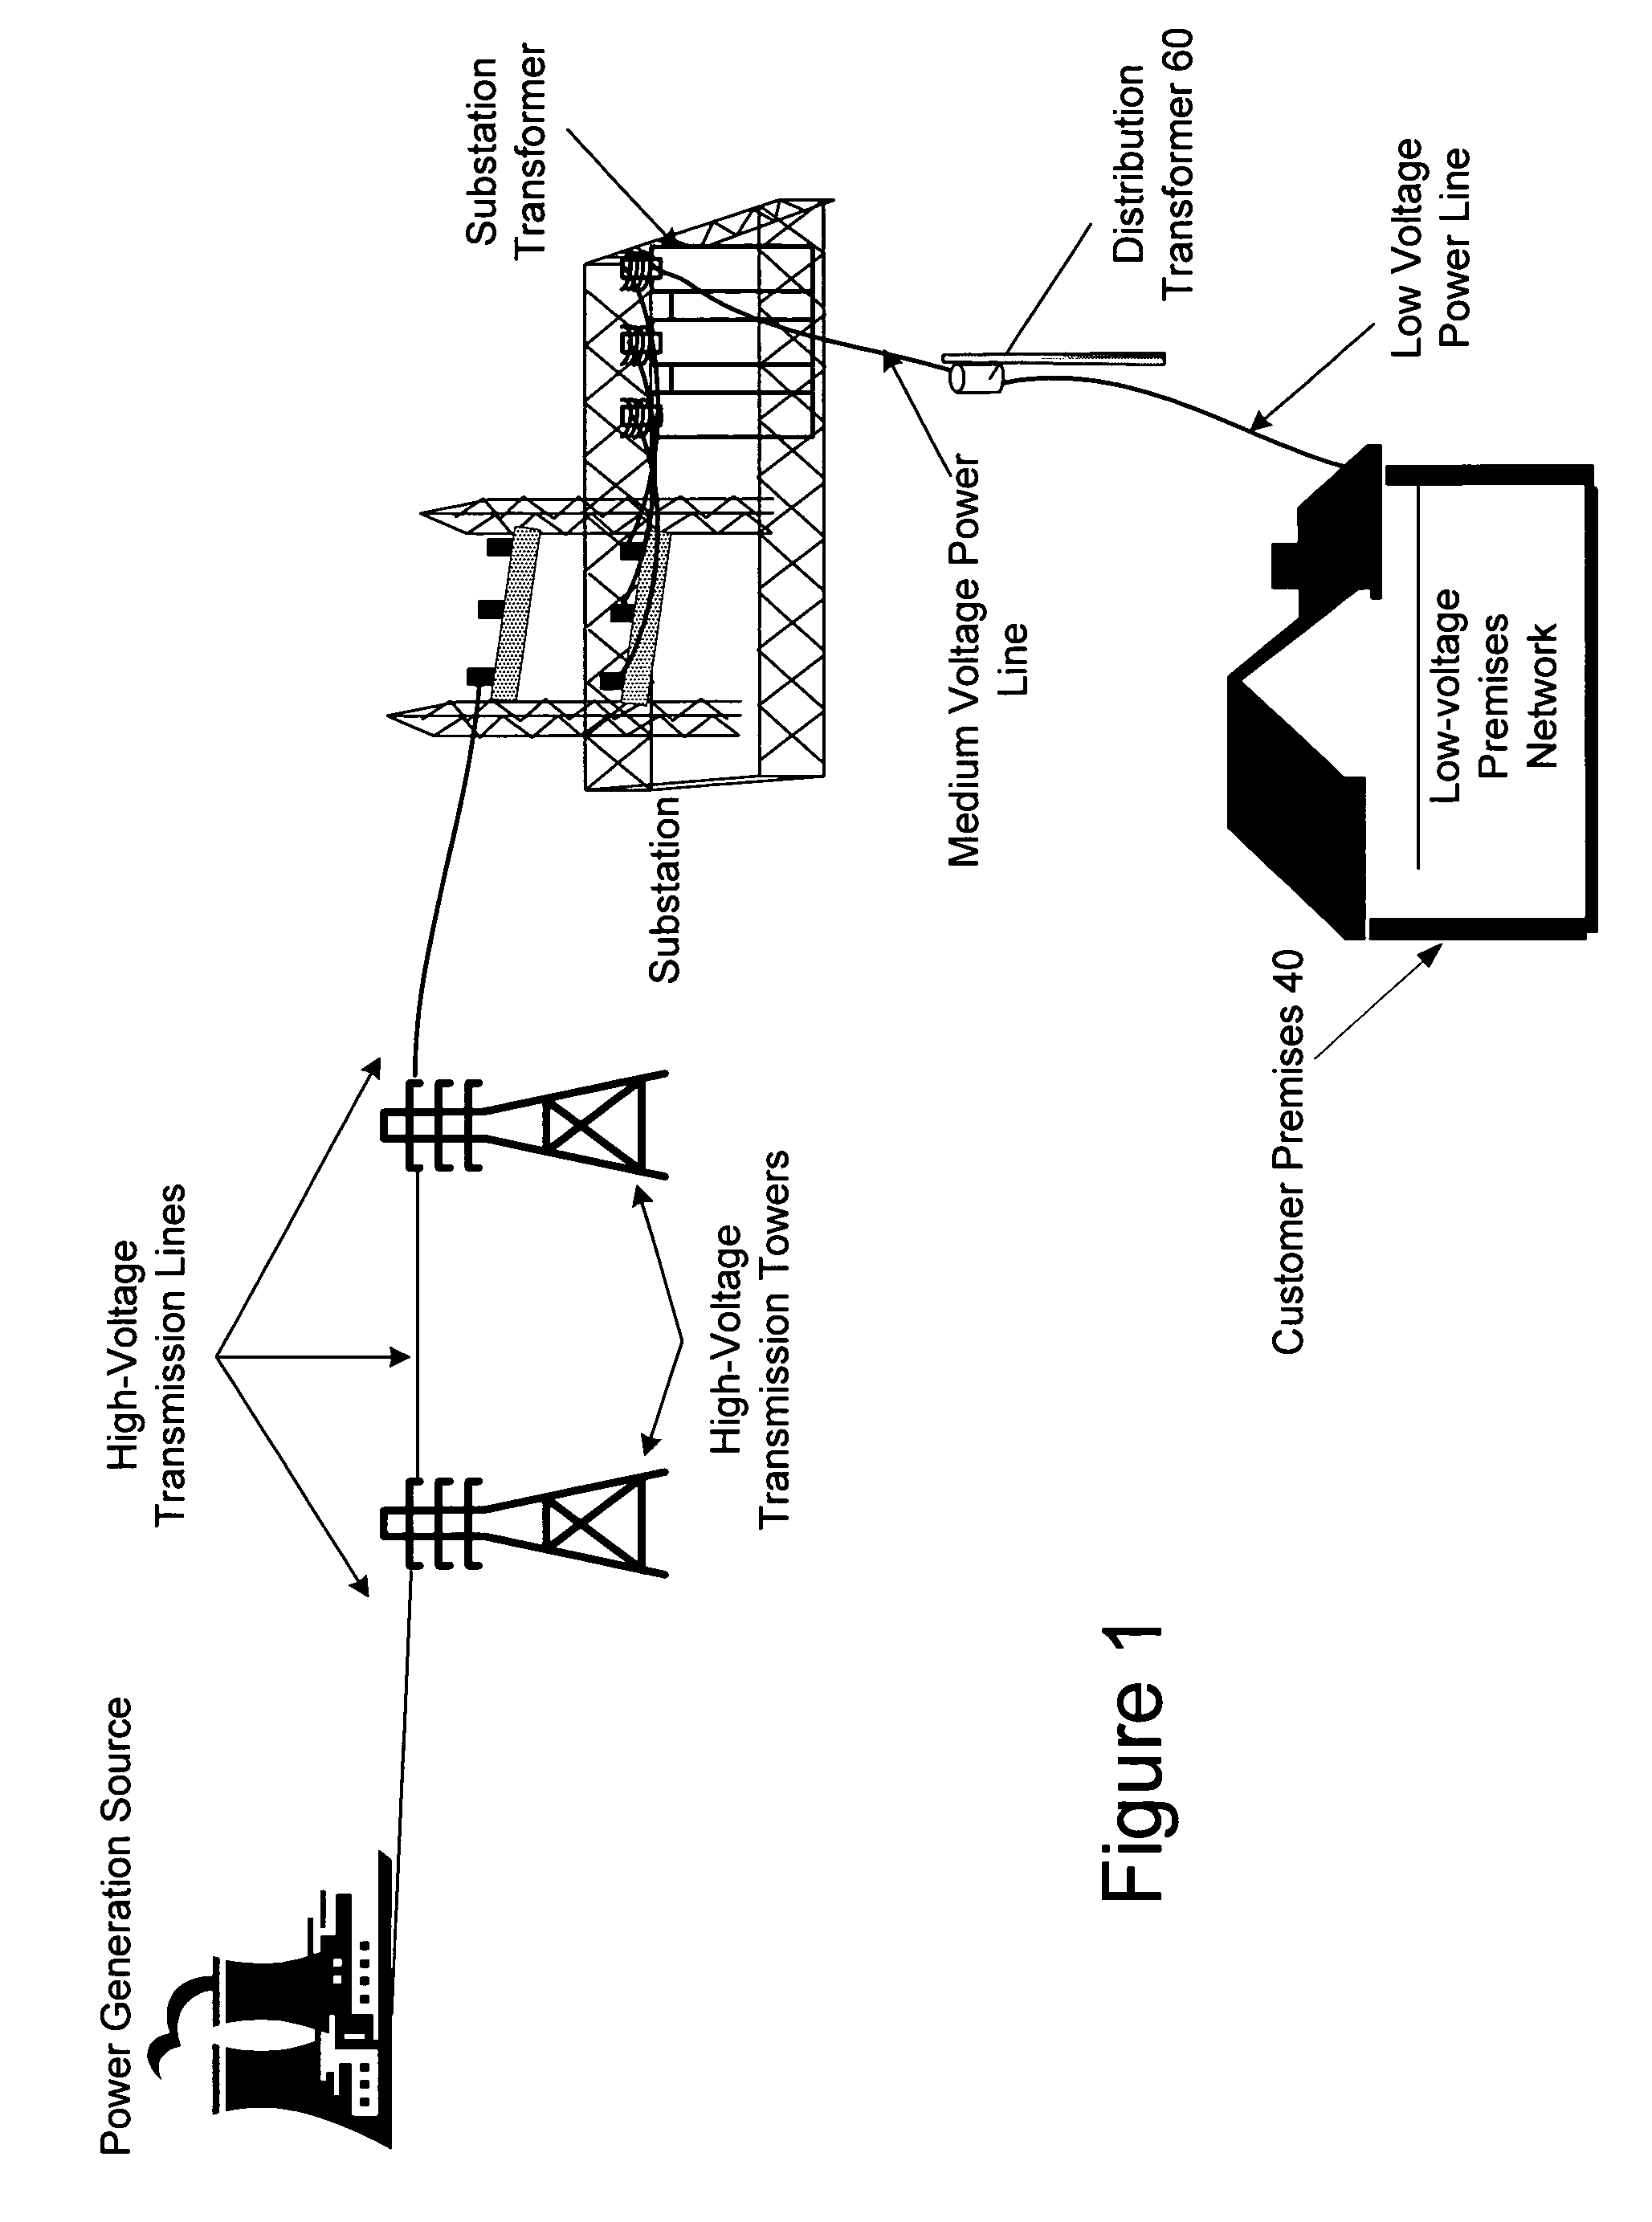 System and method for detecting noise source in a power line communications system